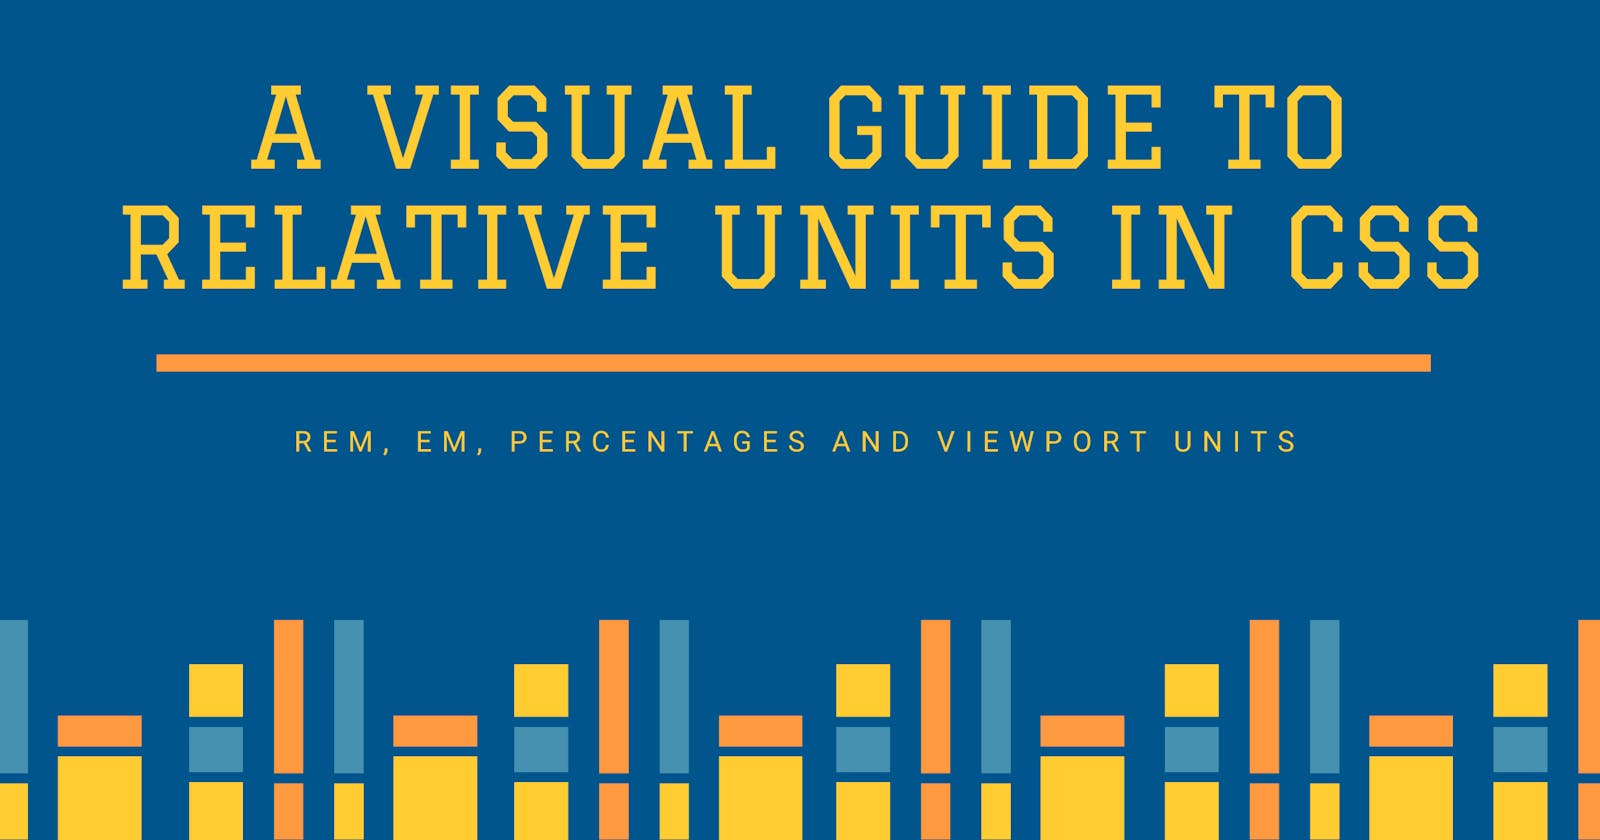 A Visual Guide To Relative Units In CSS